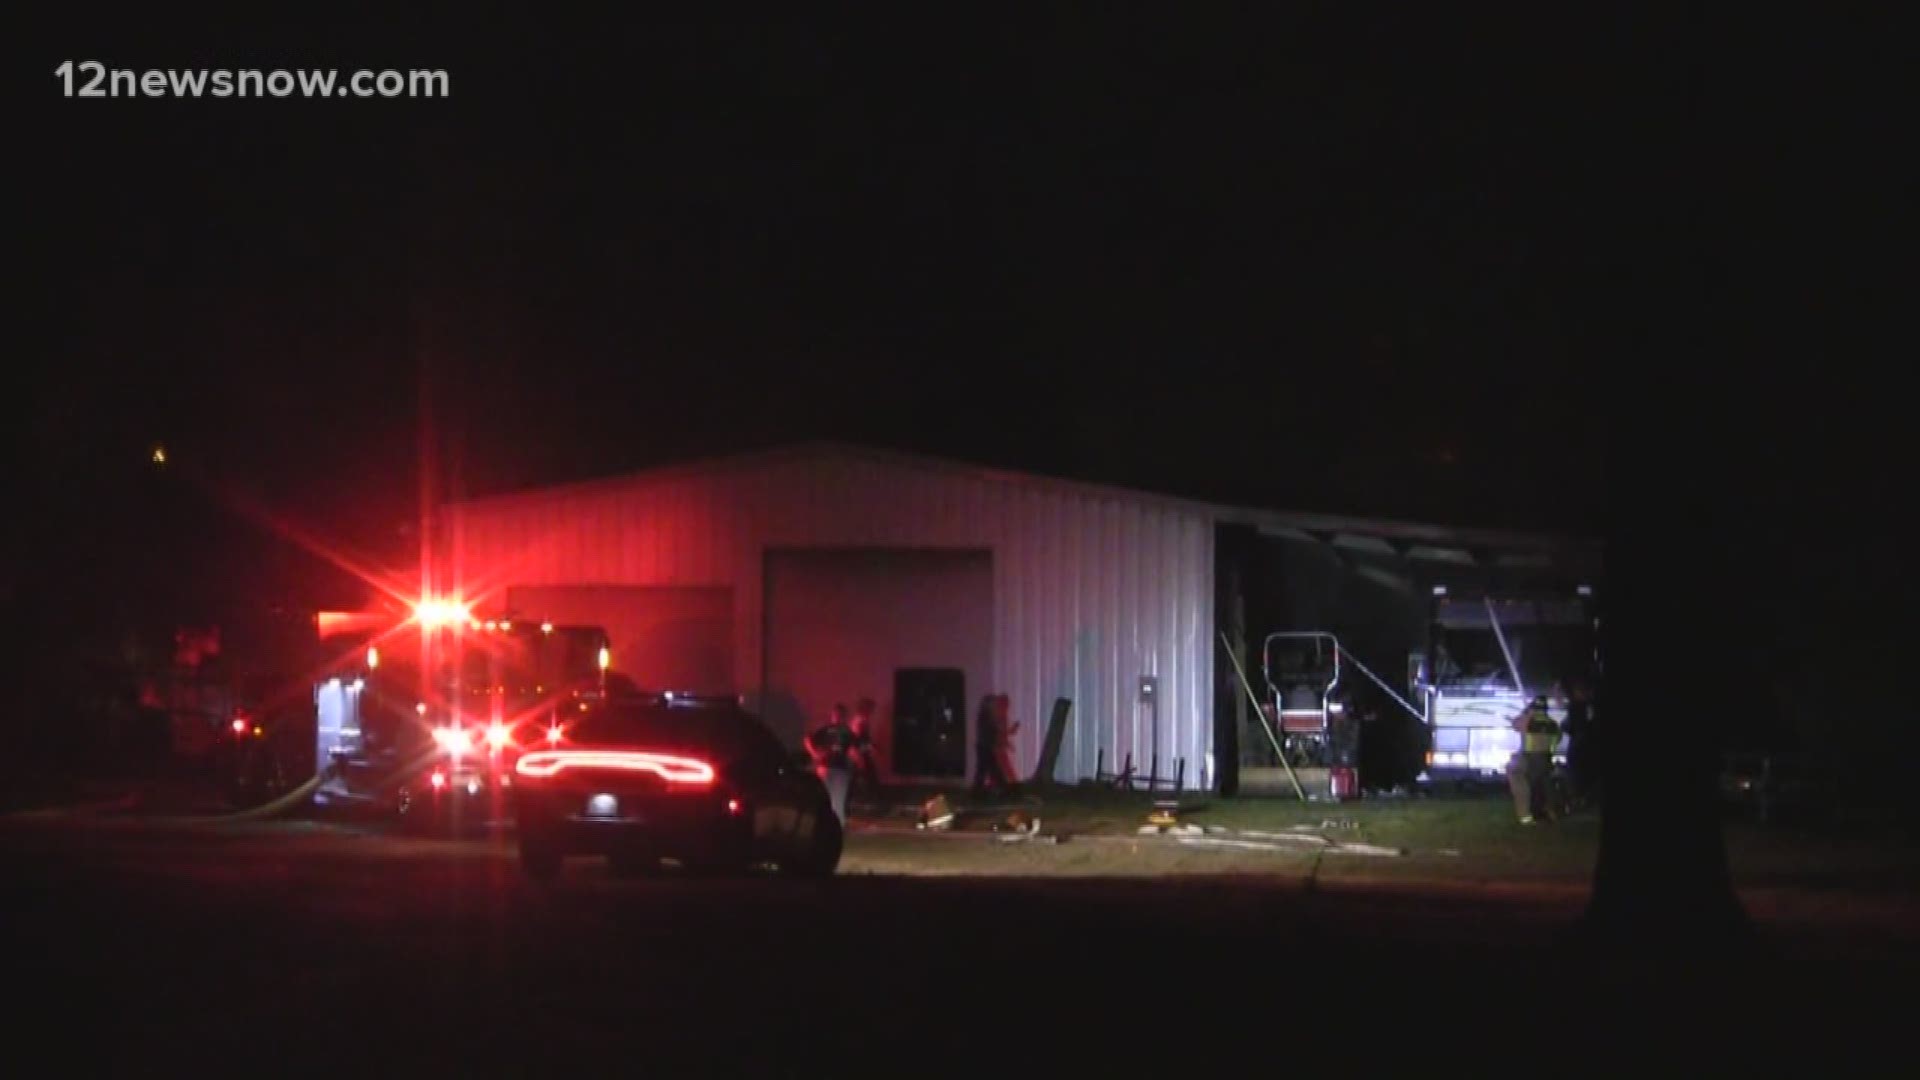 Firefighters were called to I10 and Claiborne Street in Vidor around 8 p.m. Monday.